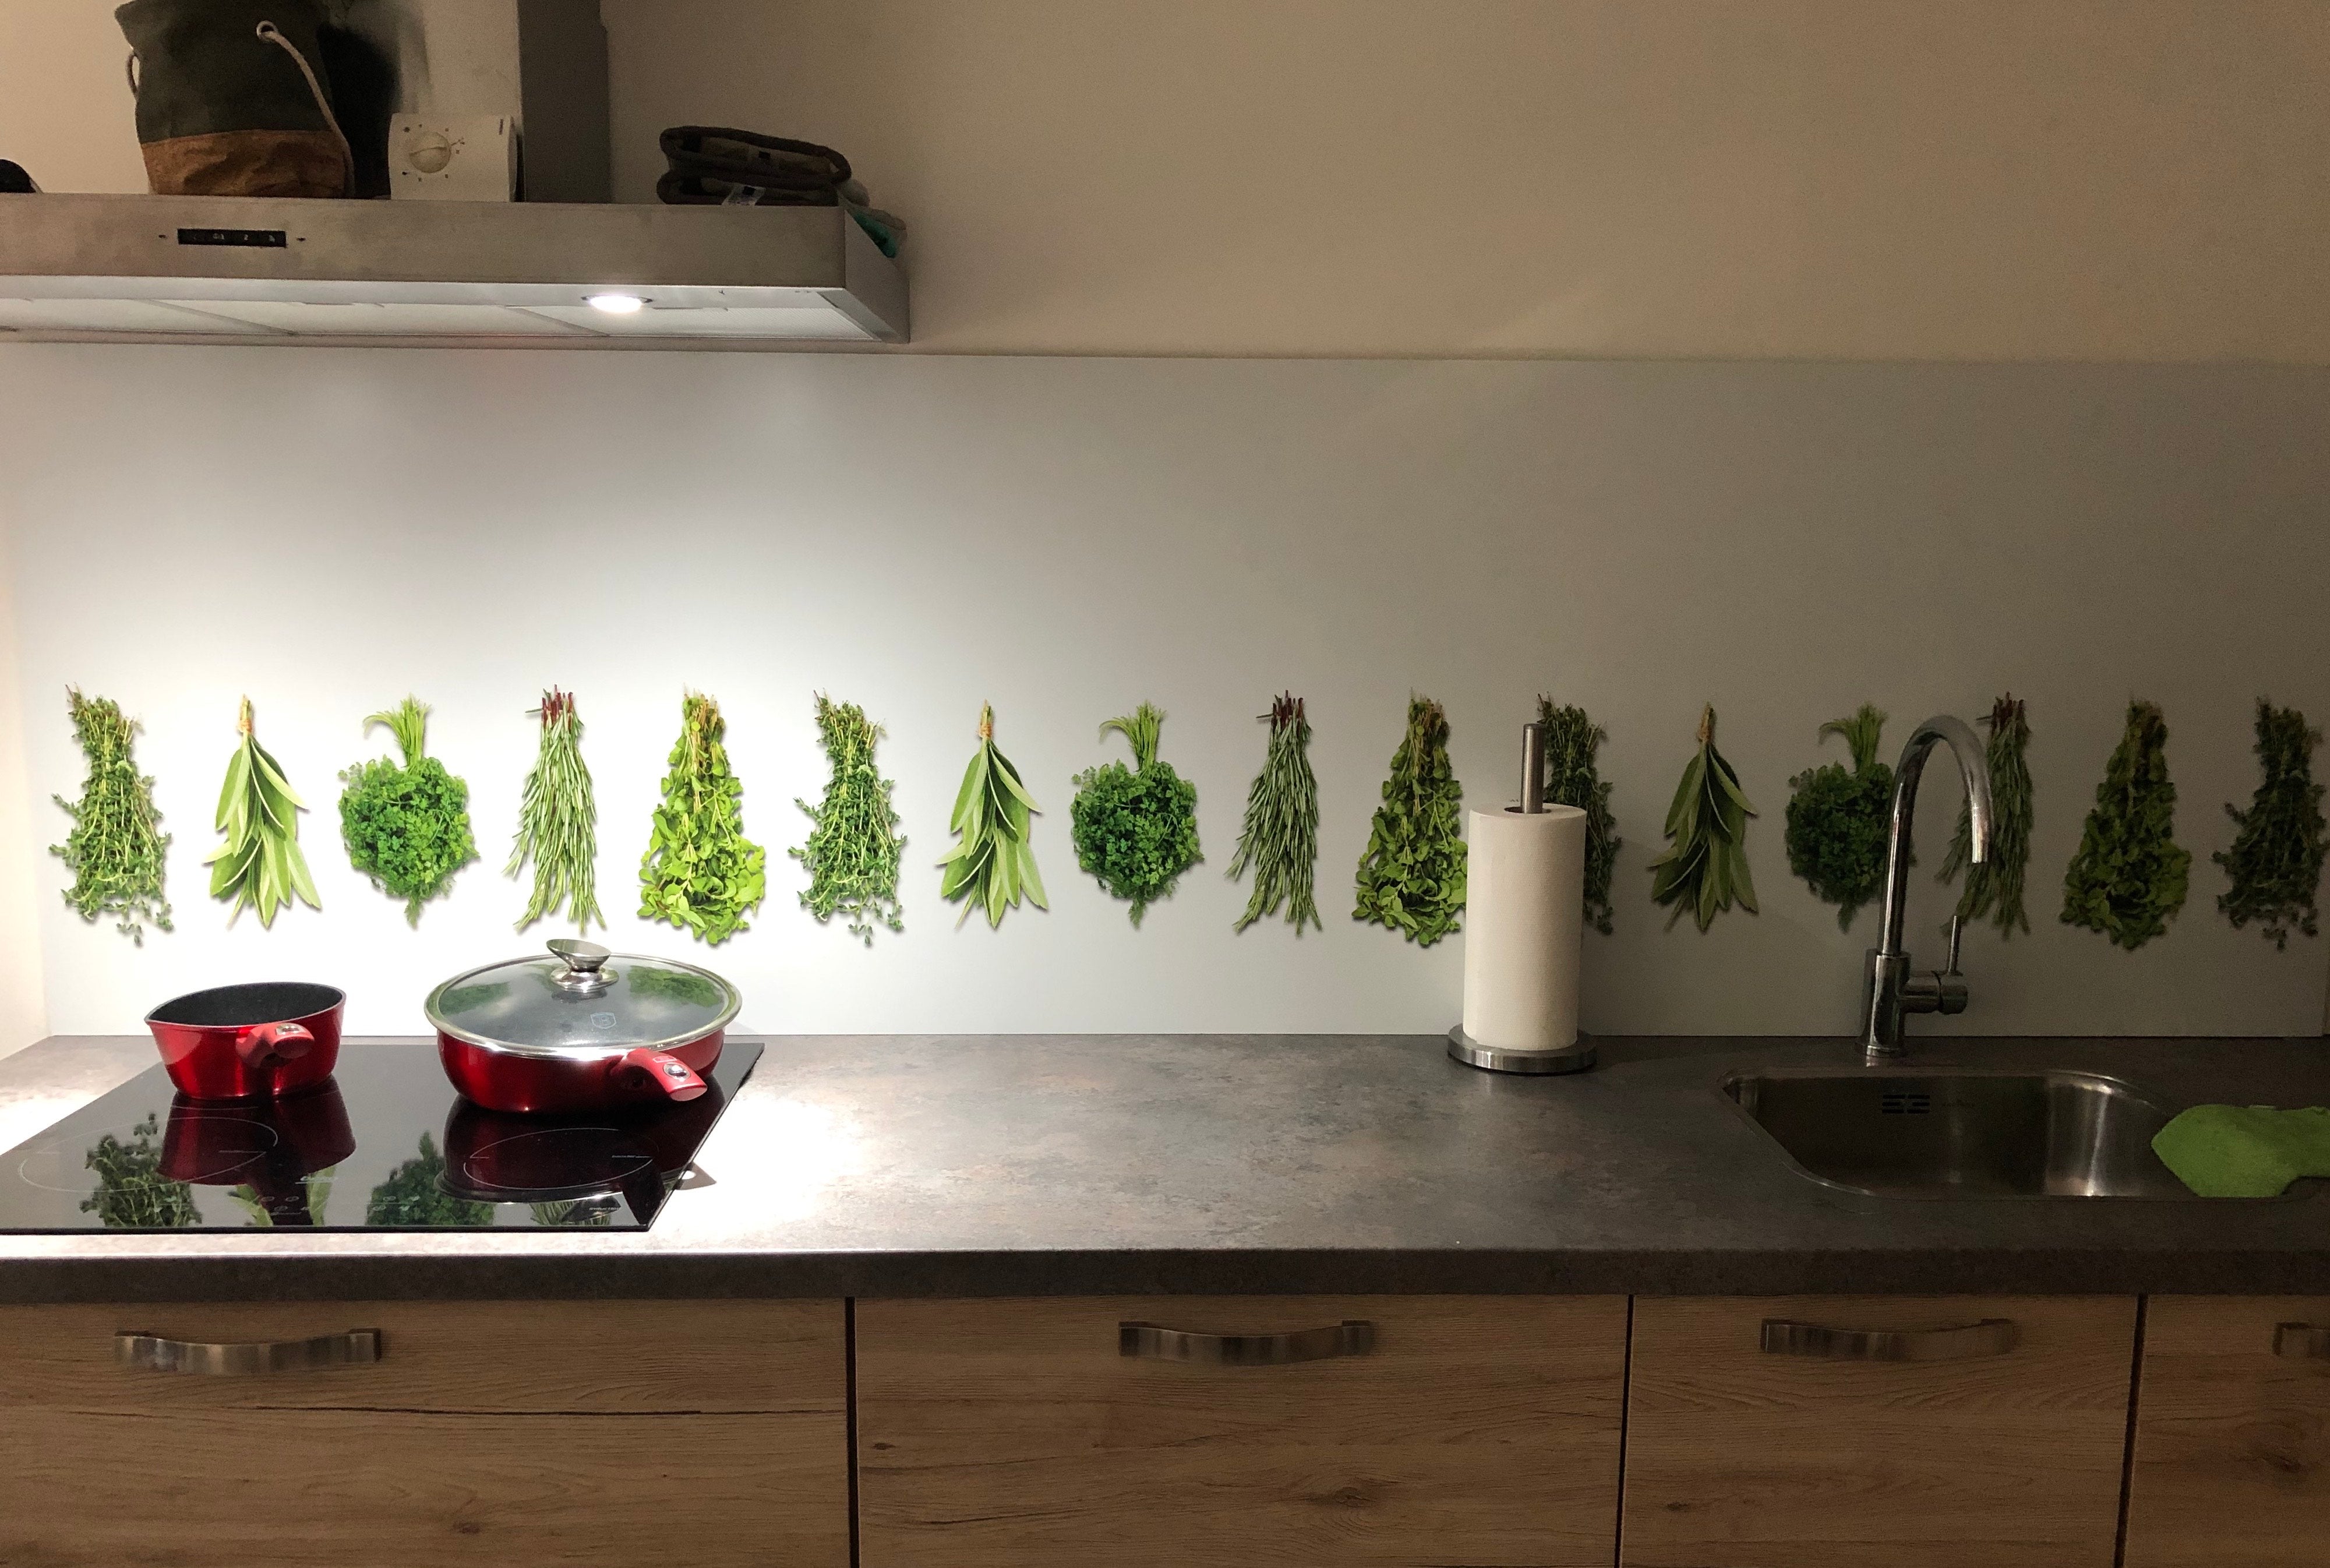 Kitchen wall - Herb bunches